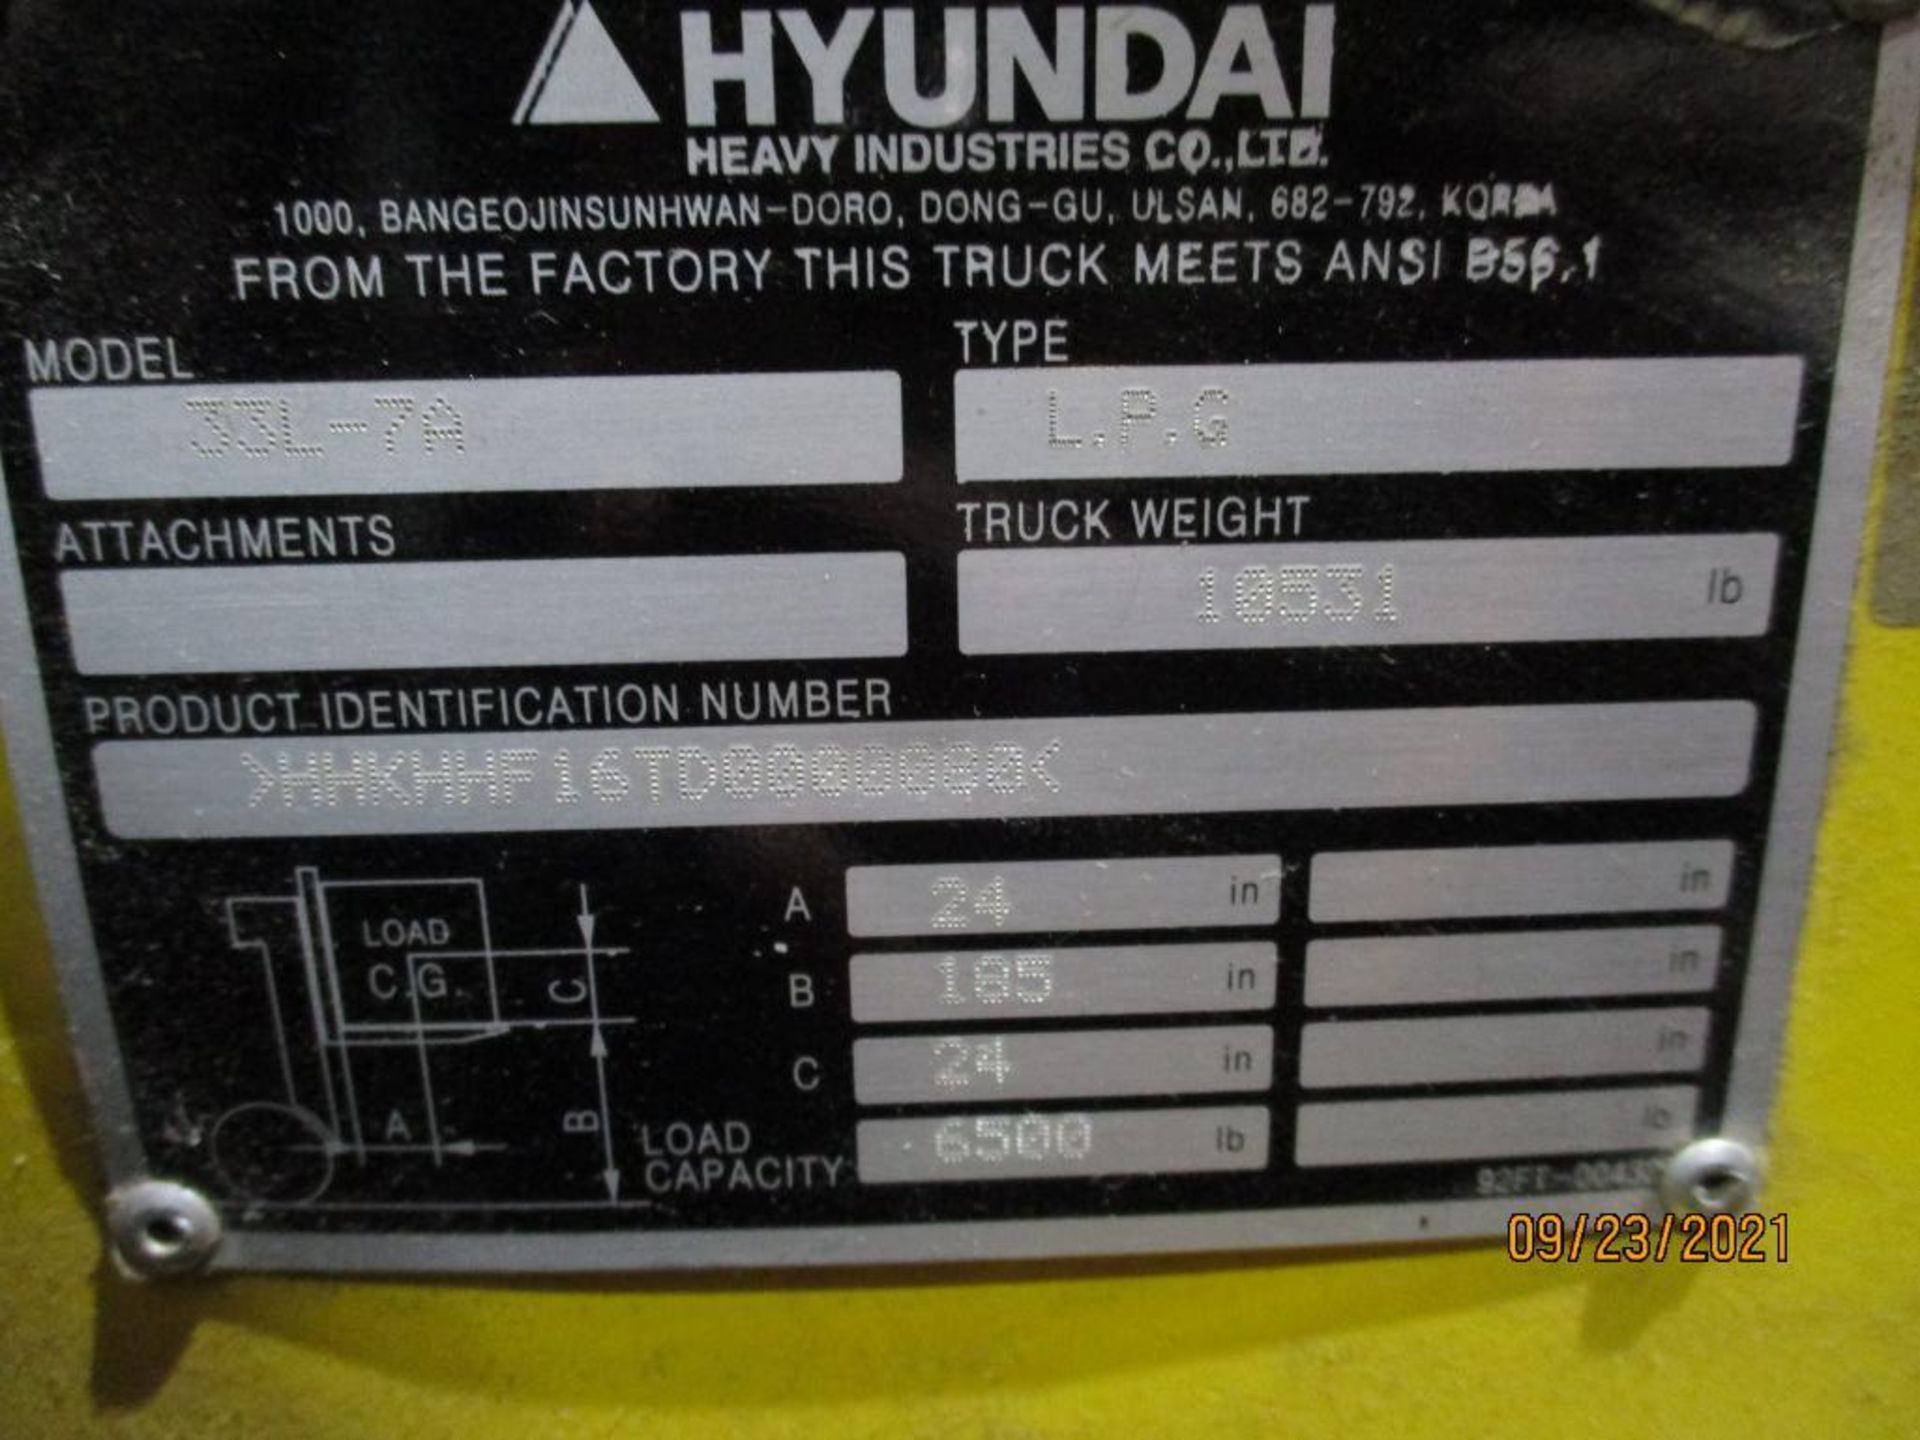 Hyundai 6,500-LPS. Capacity Model 33L-7A LP Gas Forklift Truck S/N: HHKHHF16TD0000080, Side Shift, T - Image 9 of 10